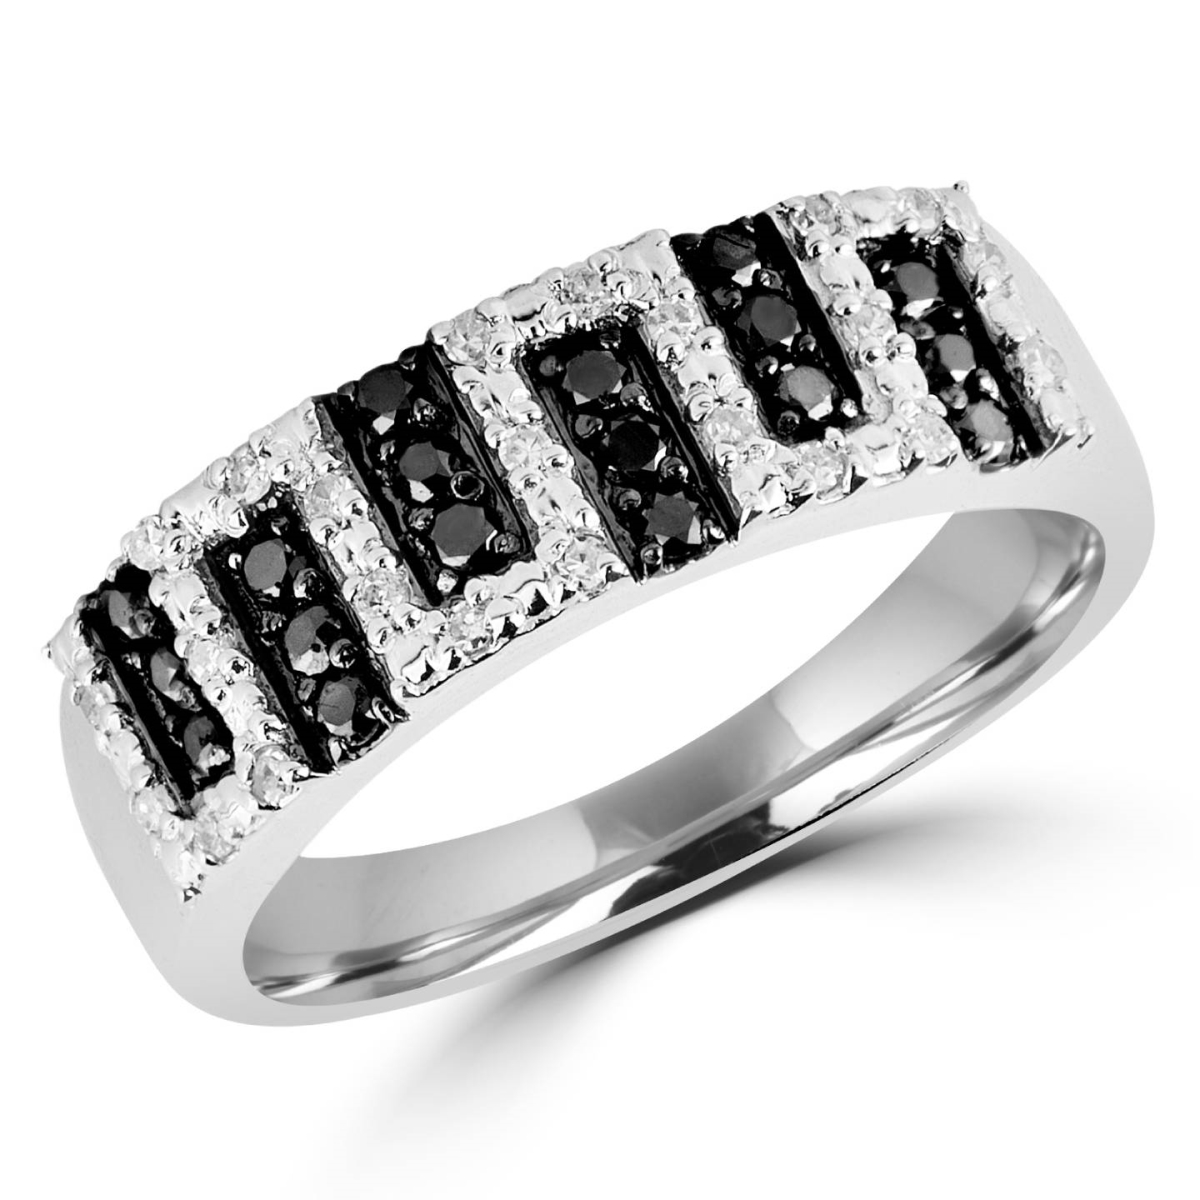 Picture of Majesty Diamonds MDR140087-3 0.25 CTW Black & White Diamond Fashion Cocktail Band Ring in 14K White Gold - Size 3